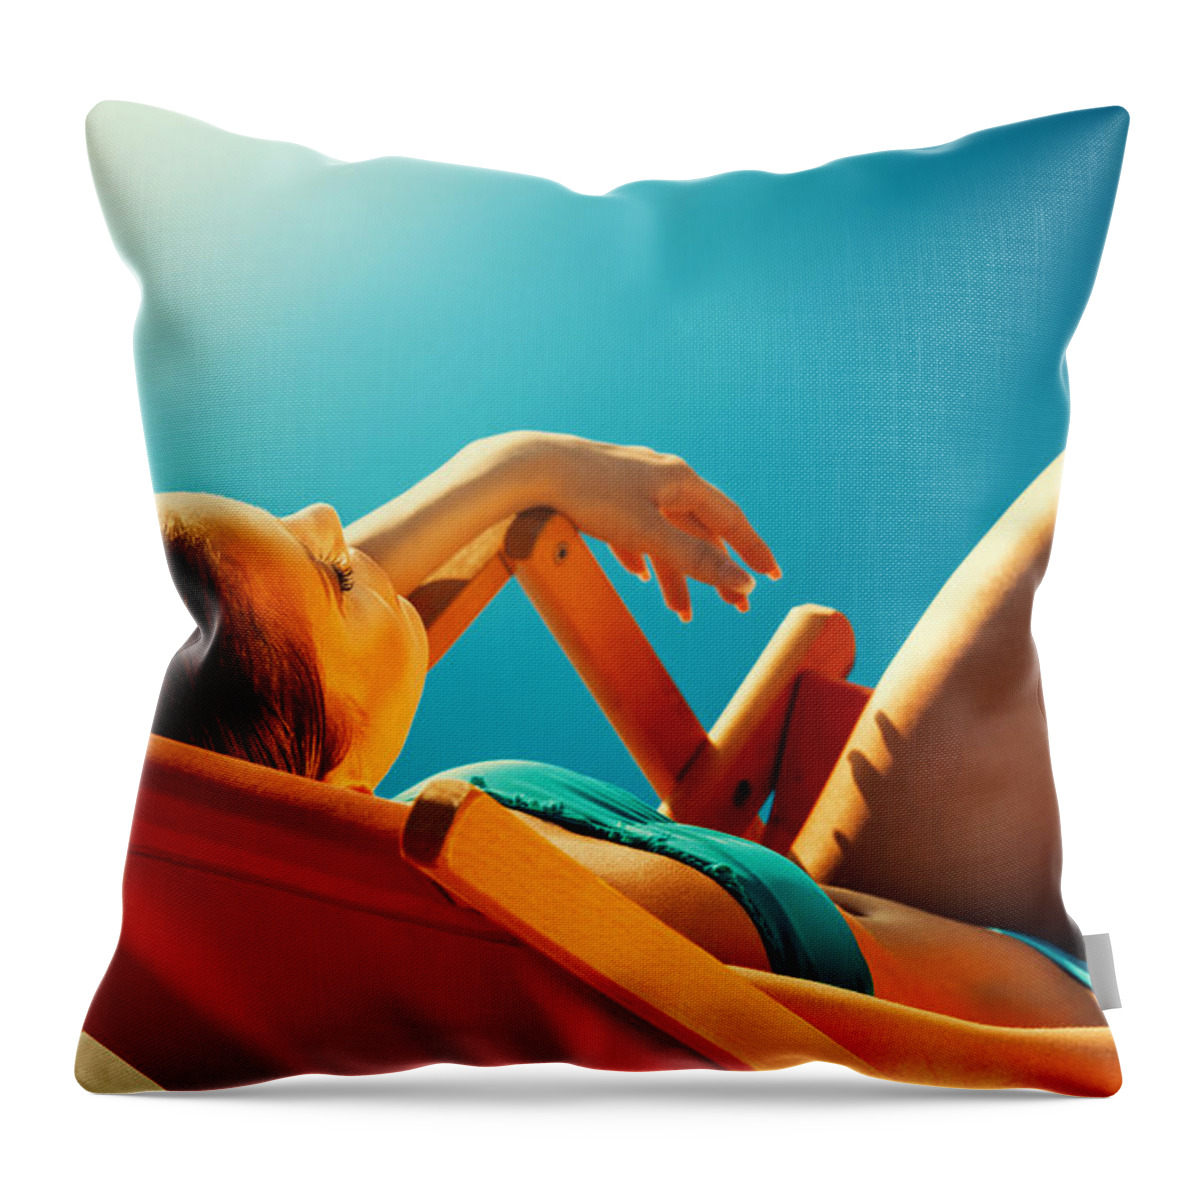 People Throw Pillow featuring the photograph Summer Vacation by Gilaxia